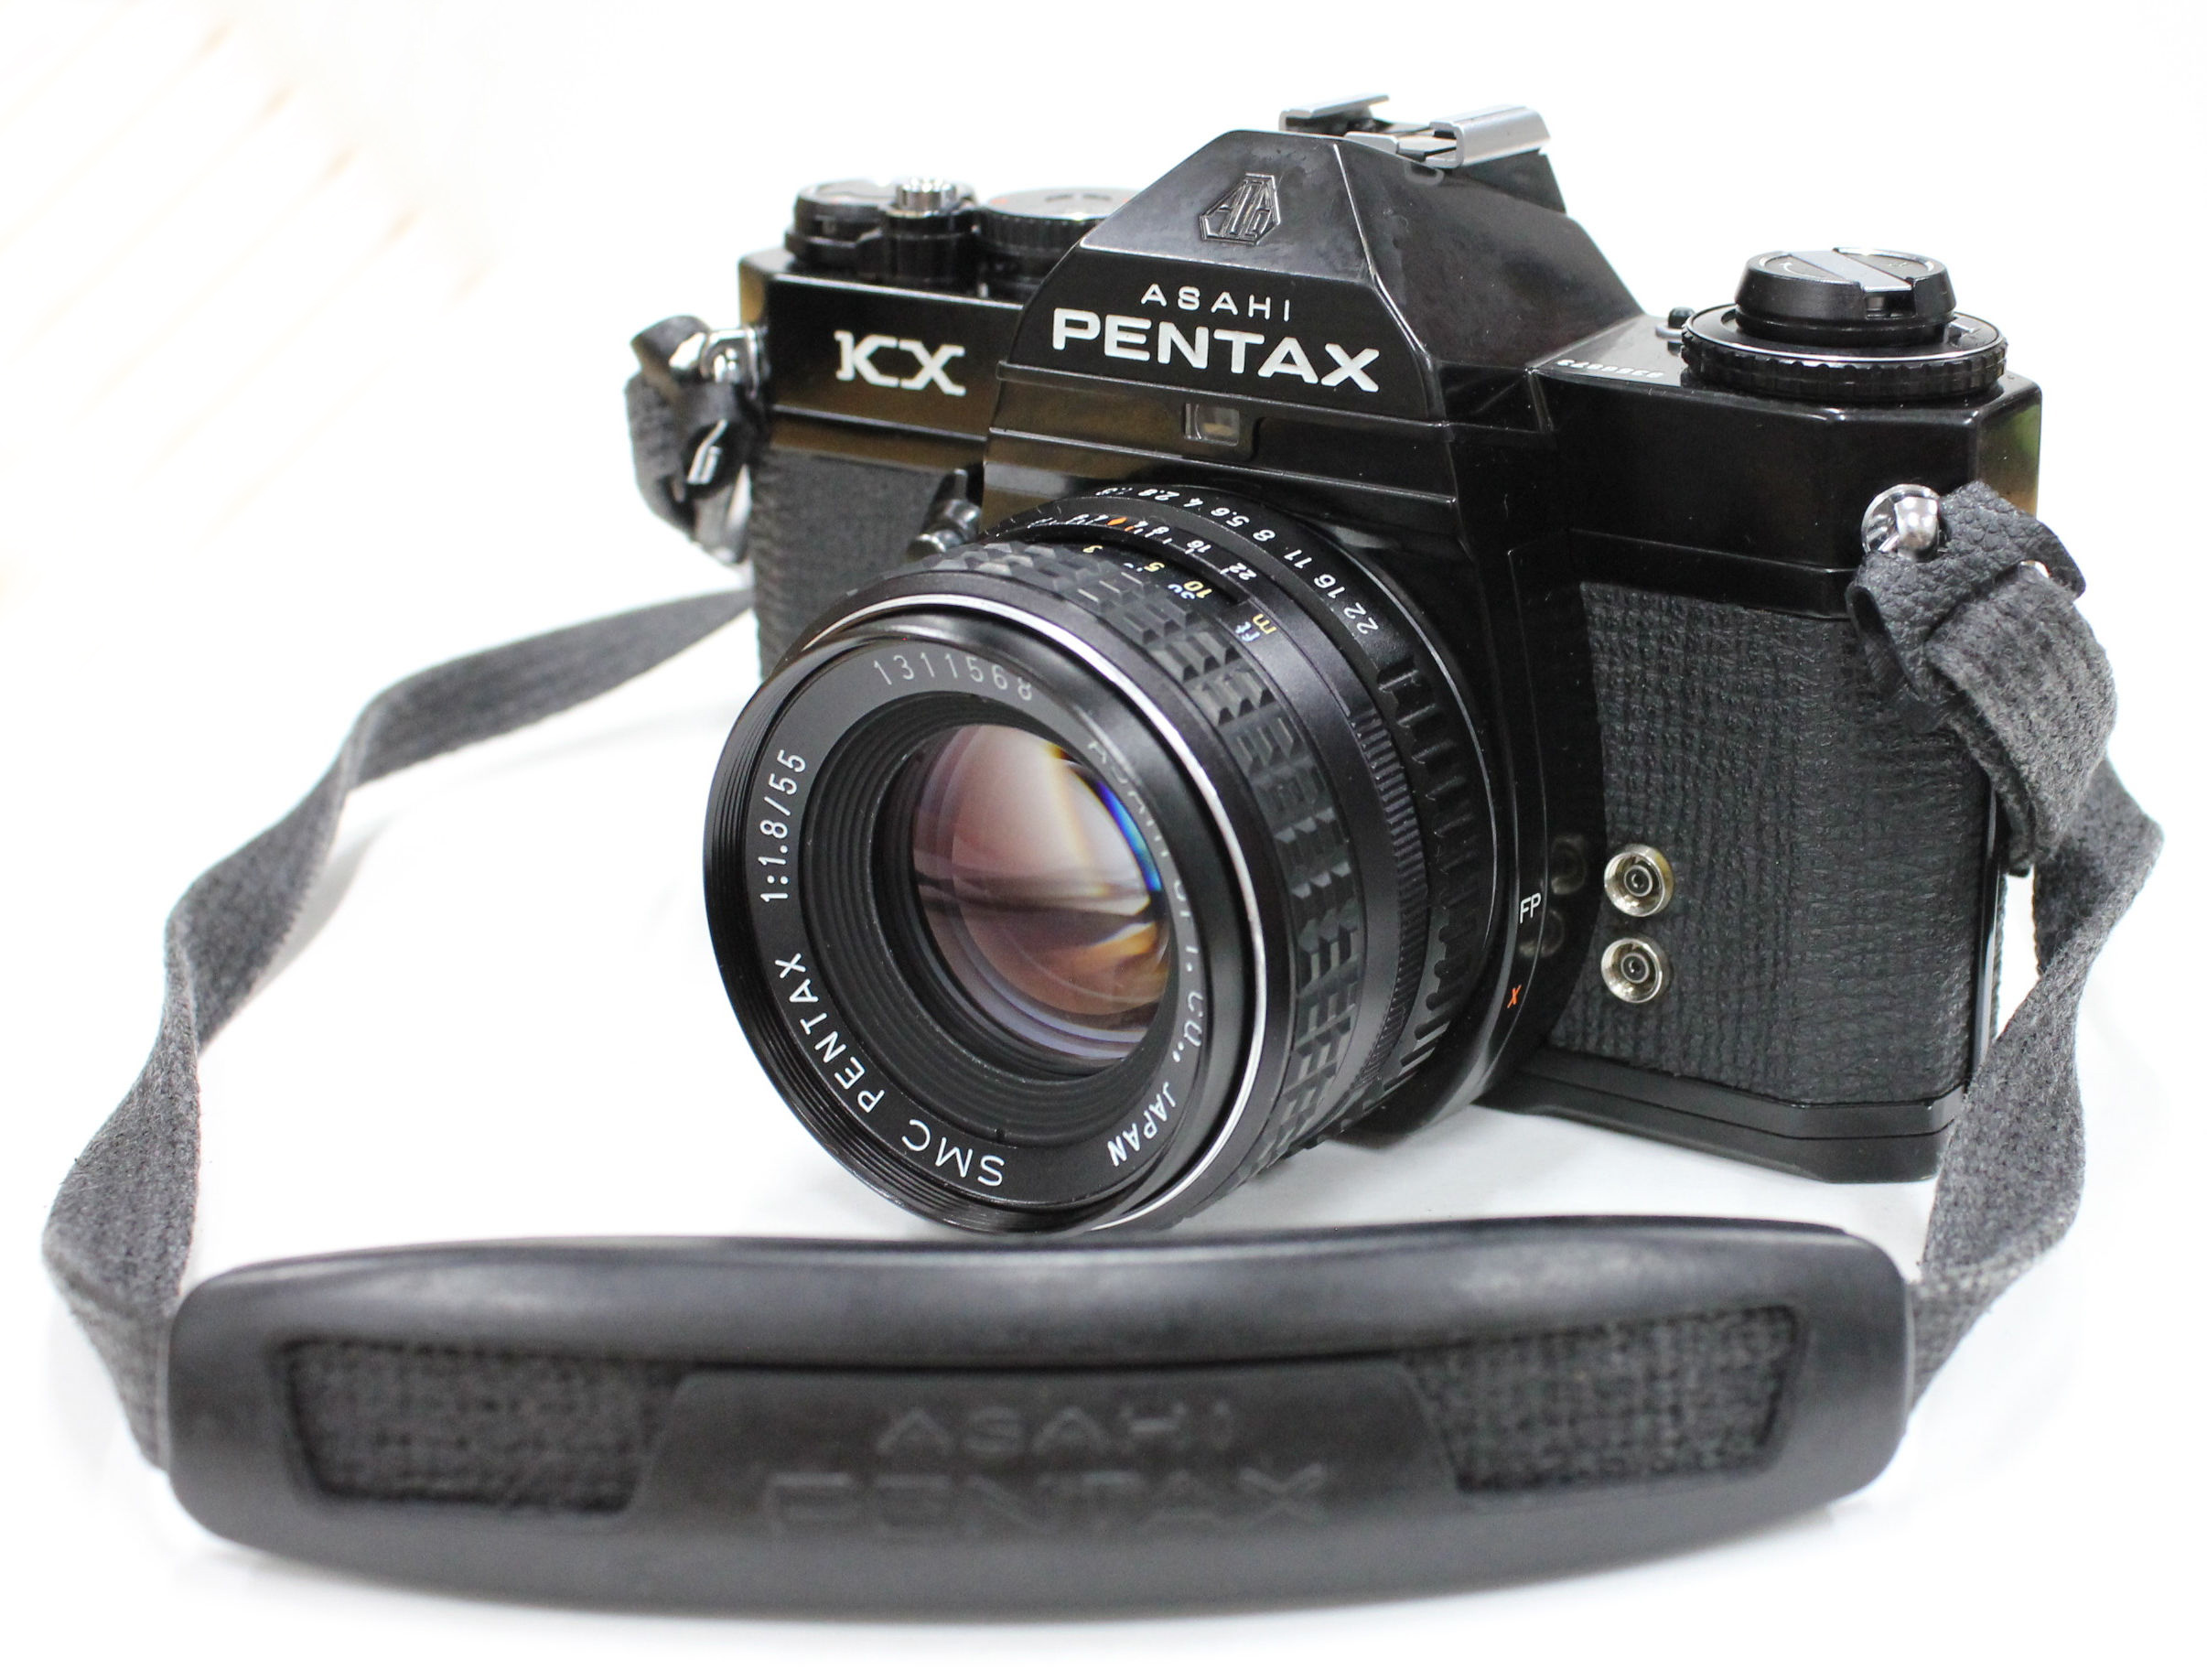 Pentax KX Body with SMC PENTAX 55mm F/1.8 Lens and Filter, Camera